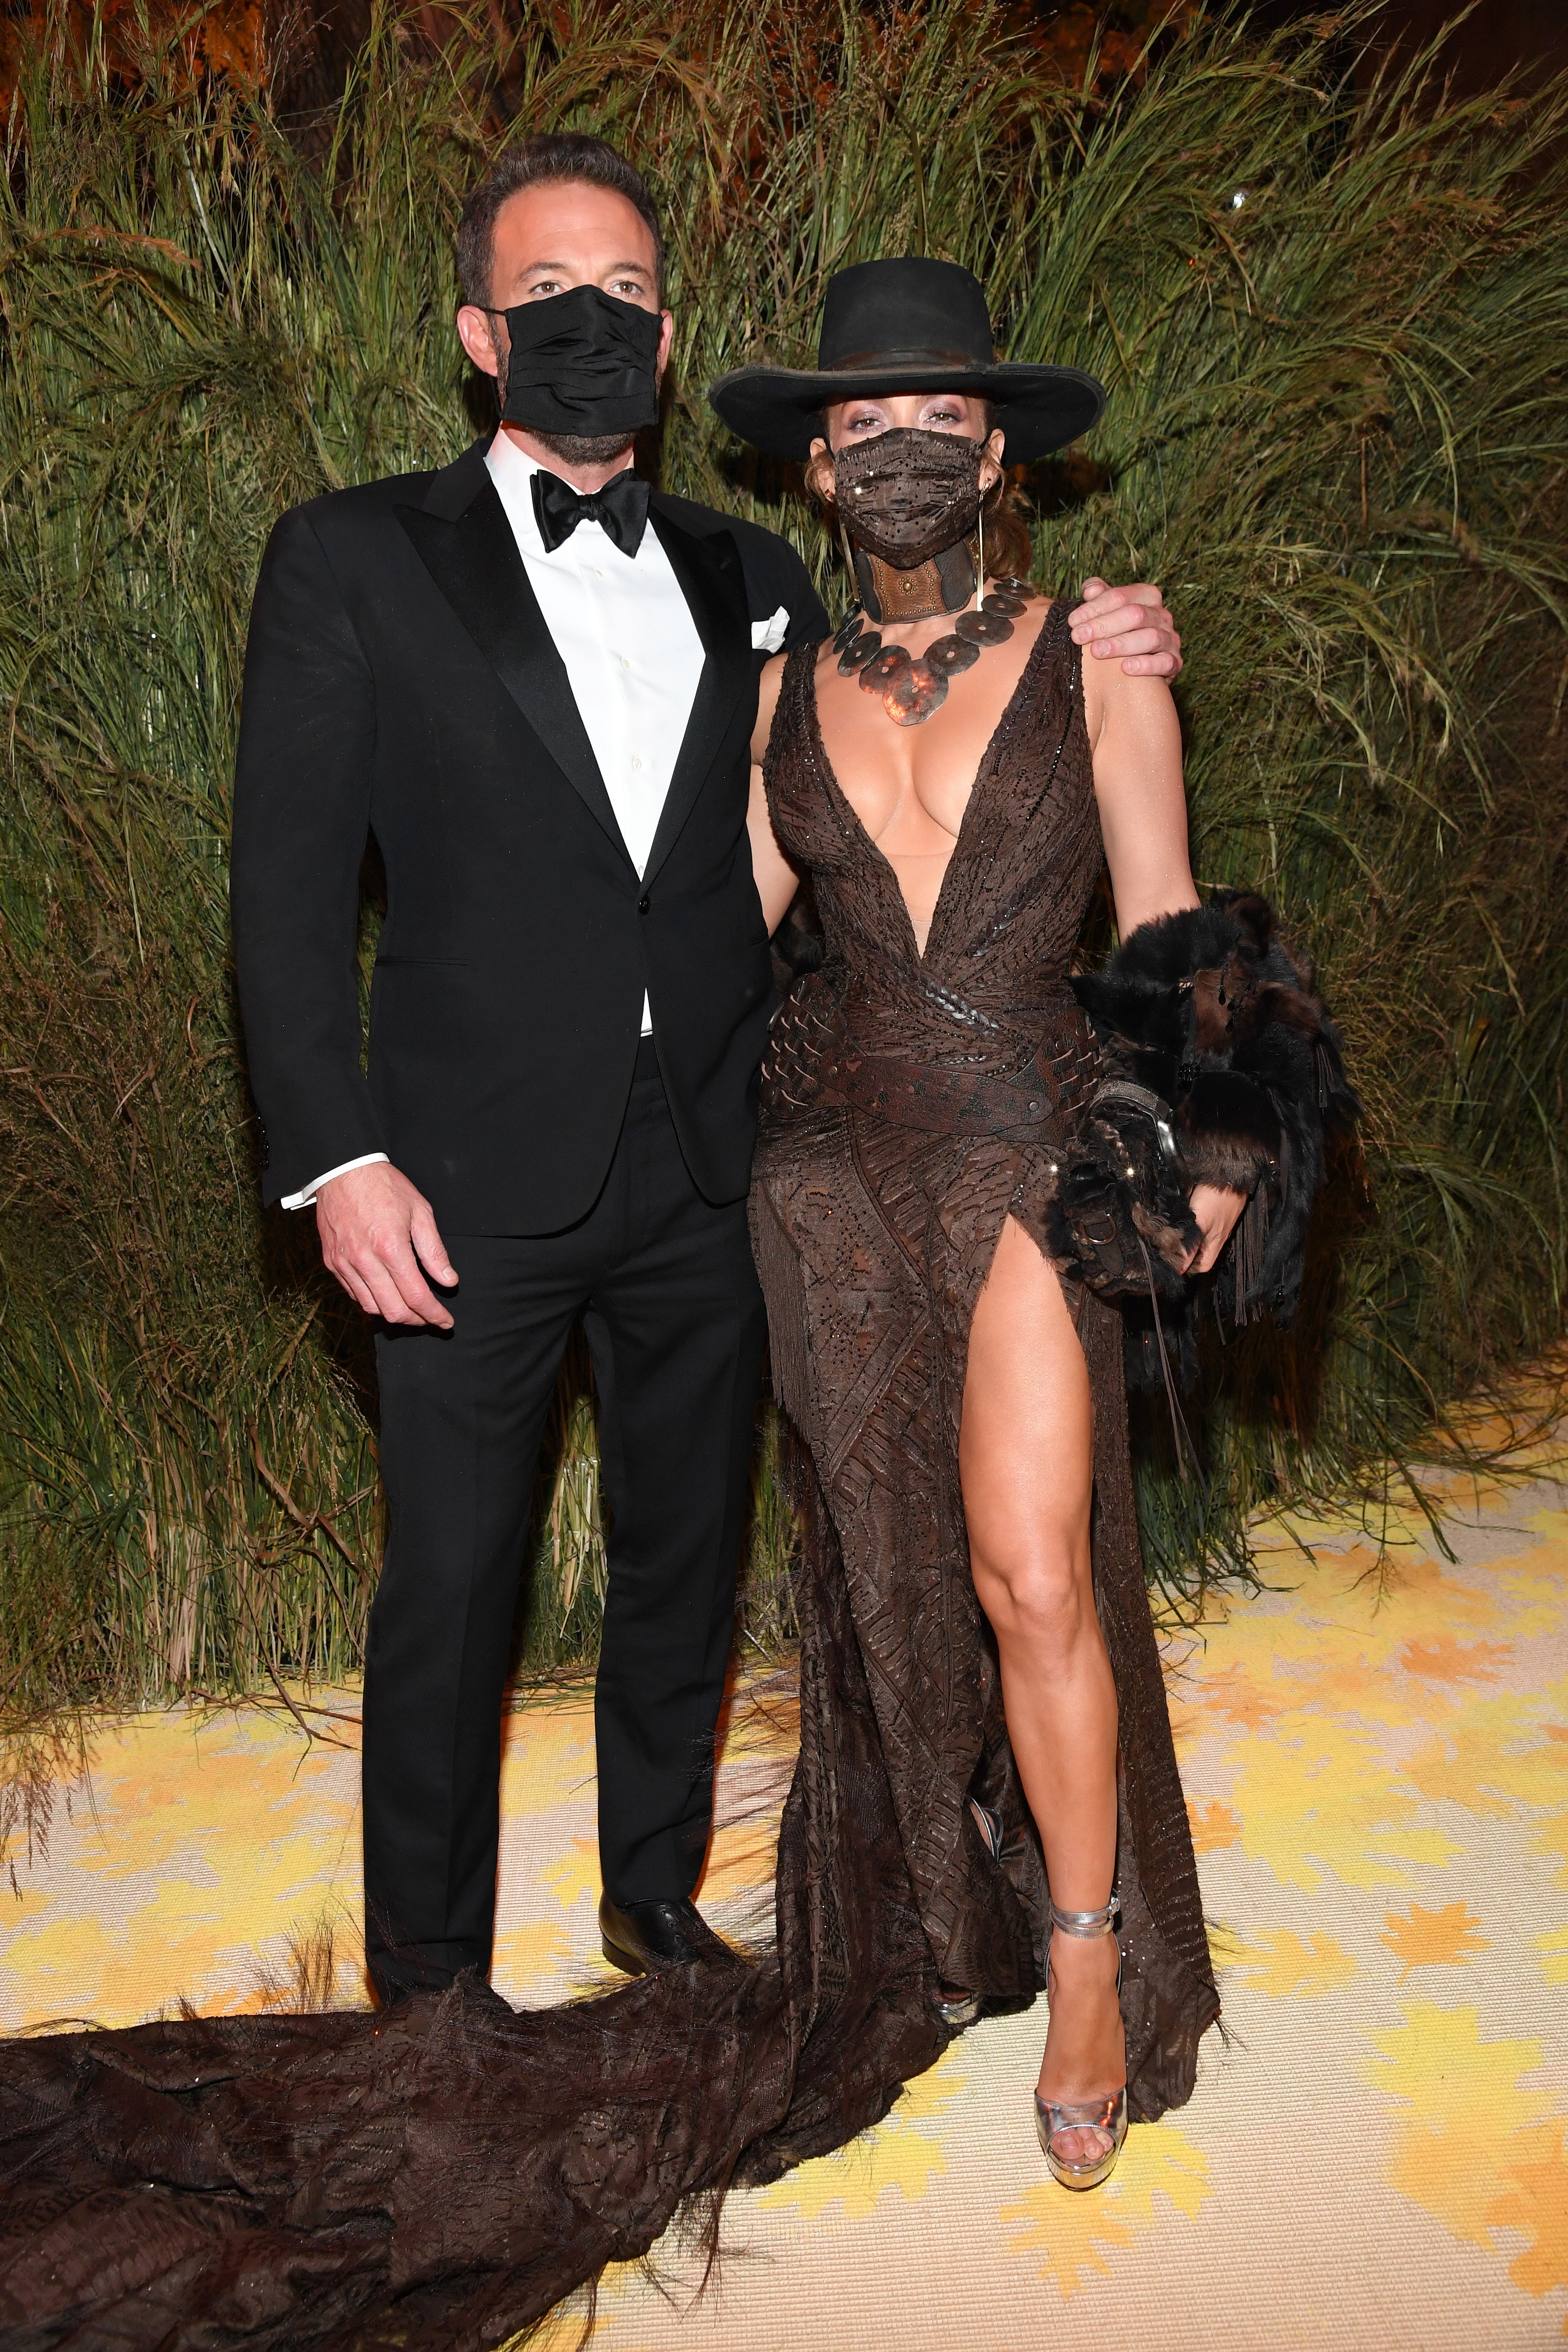 NEW YORK, NEW YORK - SEPTEMBER 13: (EXCLUSIVE COVERAGE) (L-R) Ben Afleck and Jennifer Lopez attends the The 2021 Met Gala Celebrating In America: A Lexicon Of Fashion at Metropolitan Museum of Art on September 13, 2021 in New York City. (Photo by Kevin Ma (Foto: Getty Images for The Met Museum/)